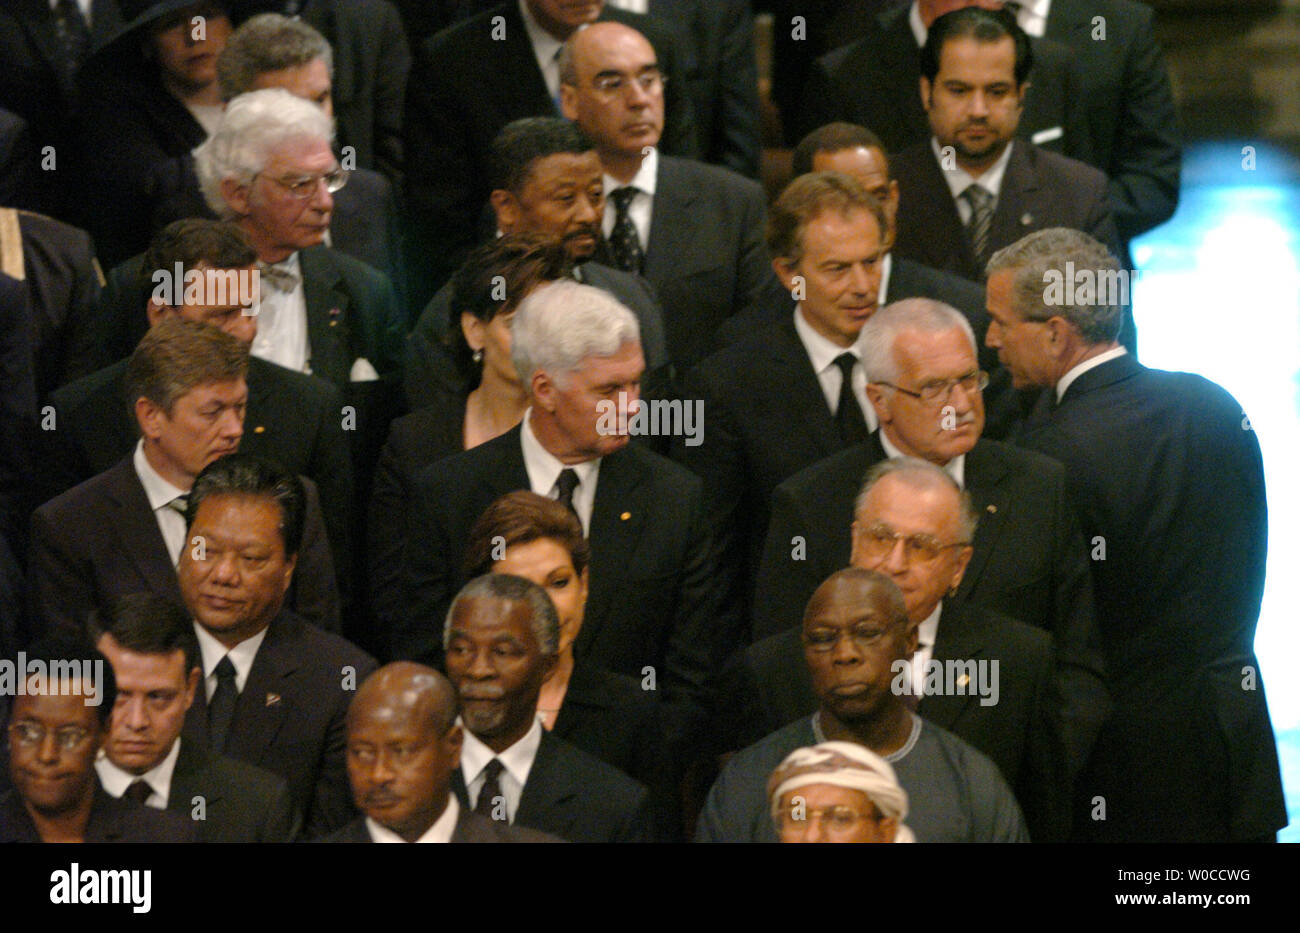 President George W. Bush stops to say hello British Prime Minister Tony Blair and other foreign leaders and their spouses after a State Funeral for former President Ronald Reagan at the National Cathedral in Washington June 11, 2004.  Leaders of the world paid tribute to the 40th president of the United States.  (UPI Photo/Pat Benic) Stock Photo